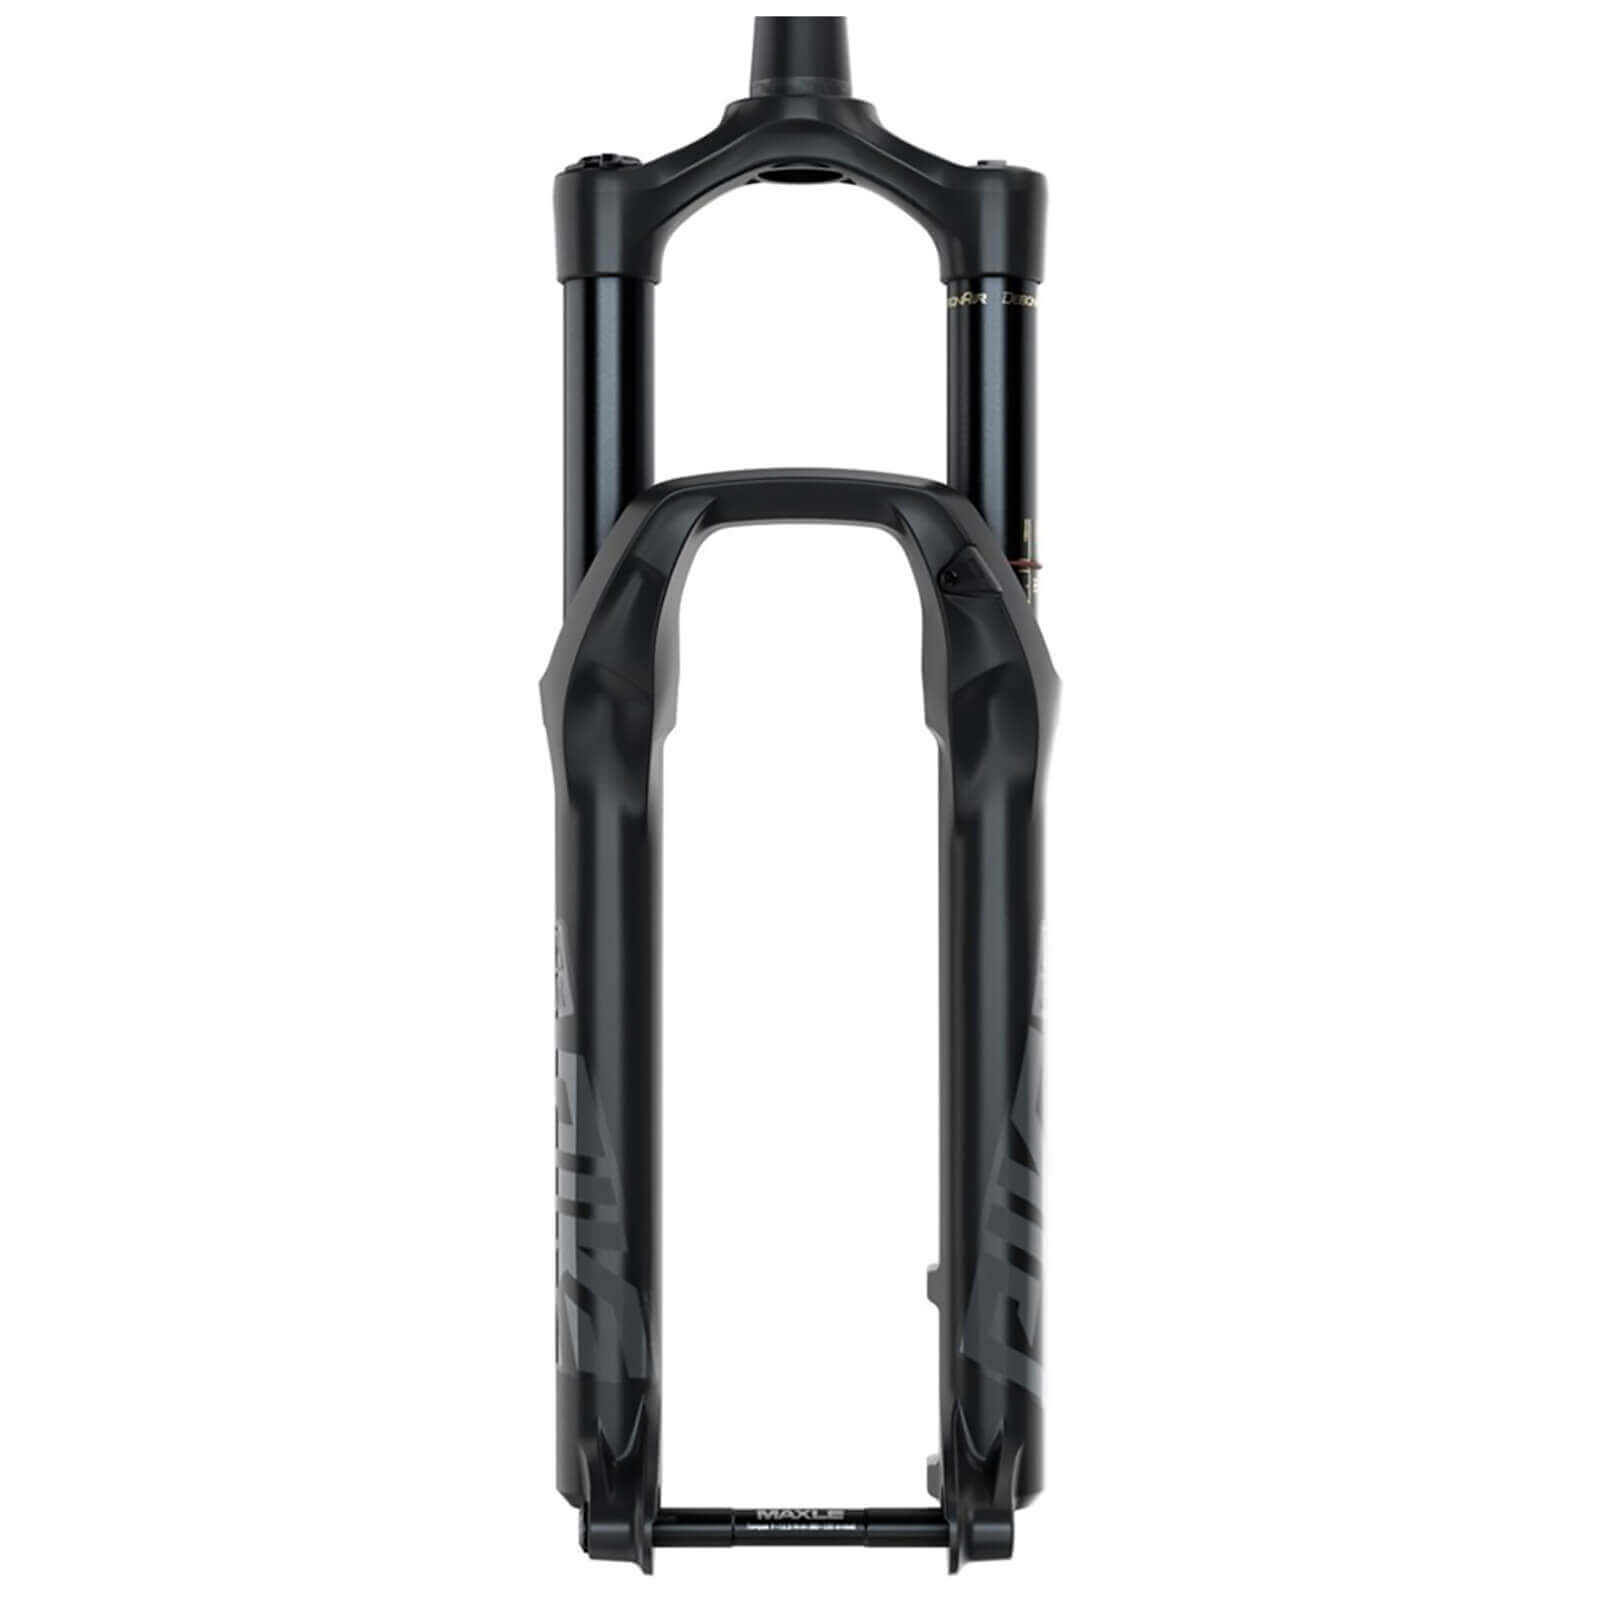 RockShox Pike Select Charger RC DebonAir MTB Suspension Forks - 29 Inch - 120mm Travel - 51mm Offset - 15x110mm Axle - Diffusion Black